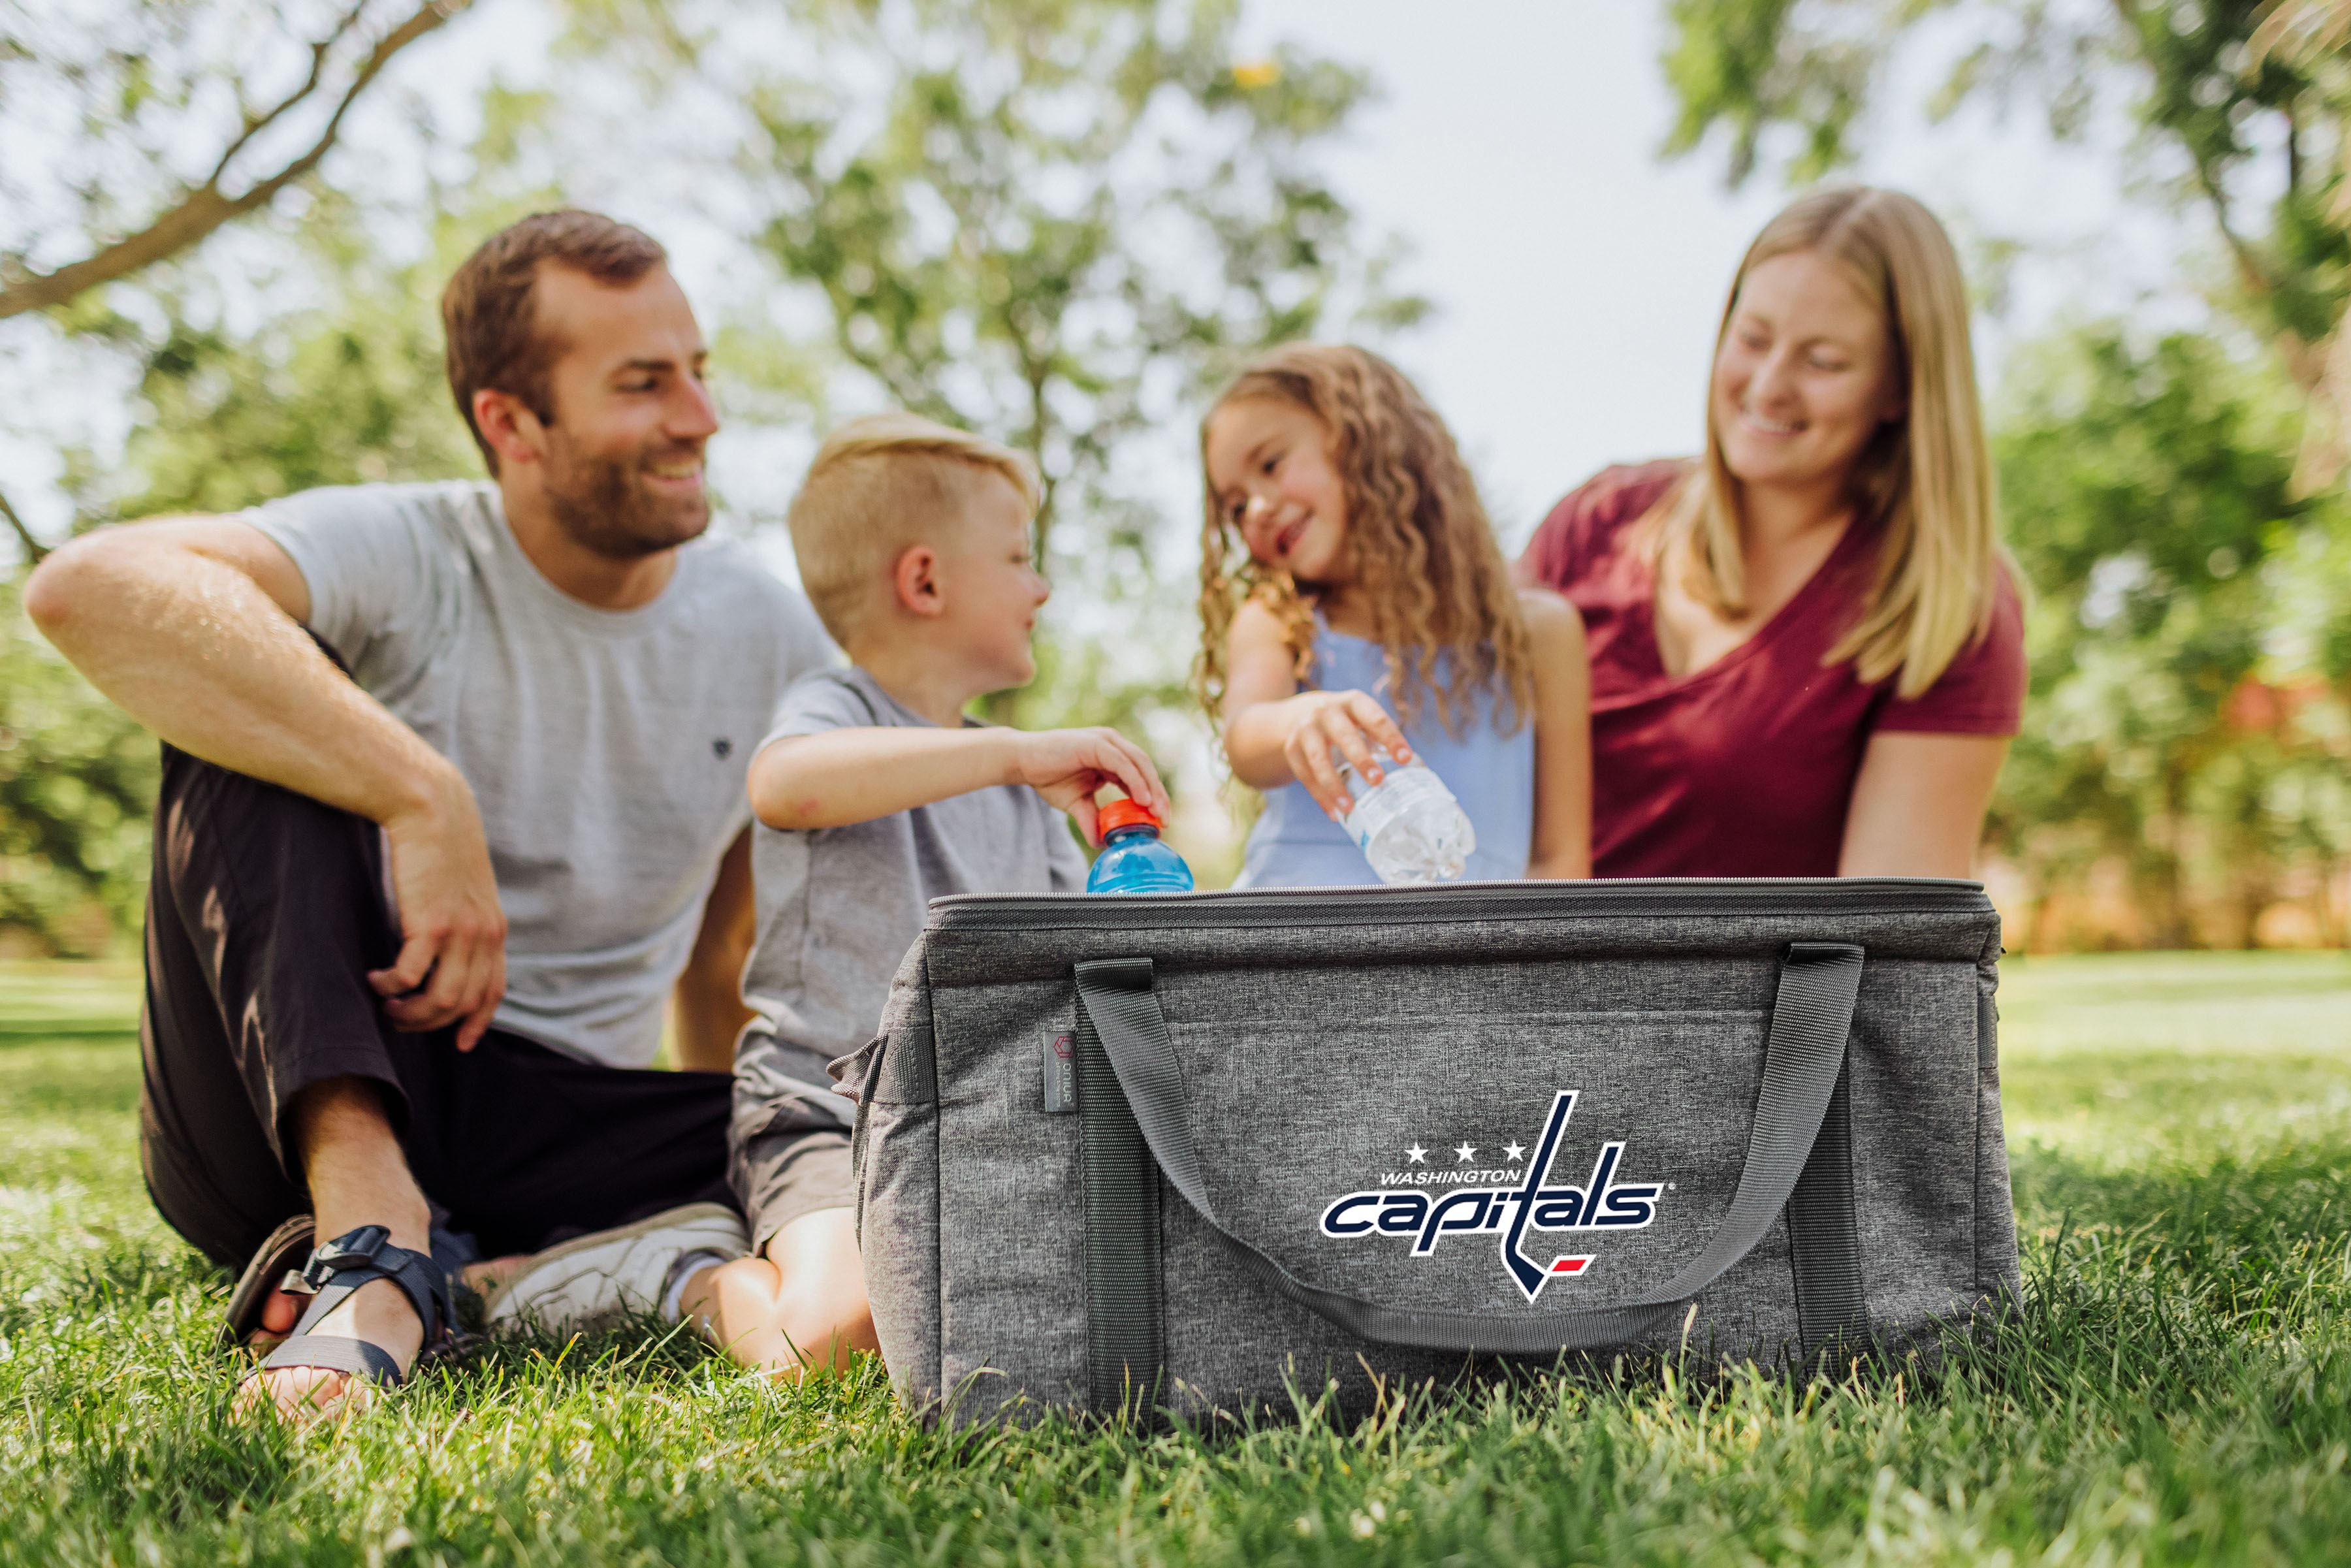 Washington Capitals - 64 Can Collapsible Cooler